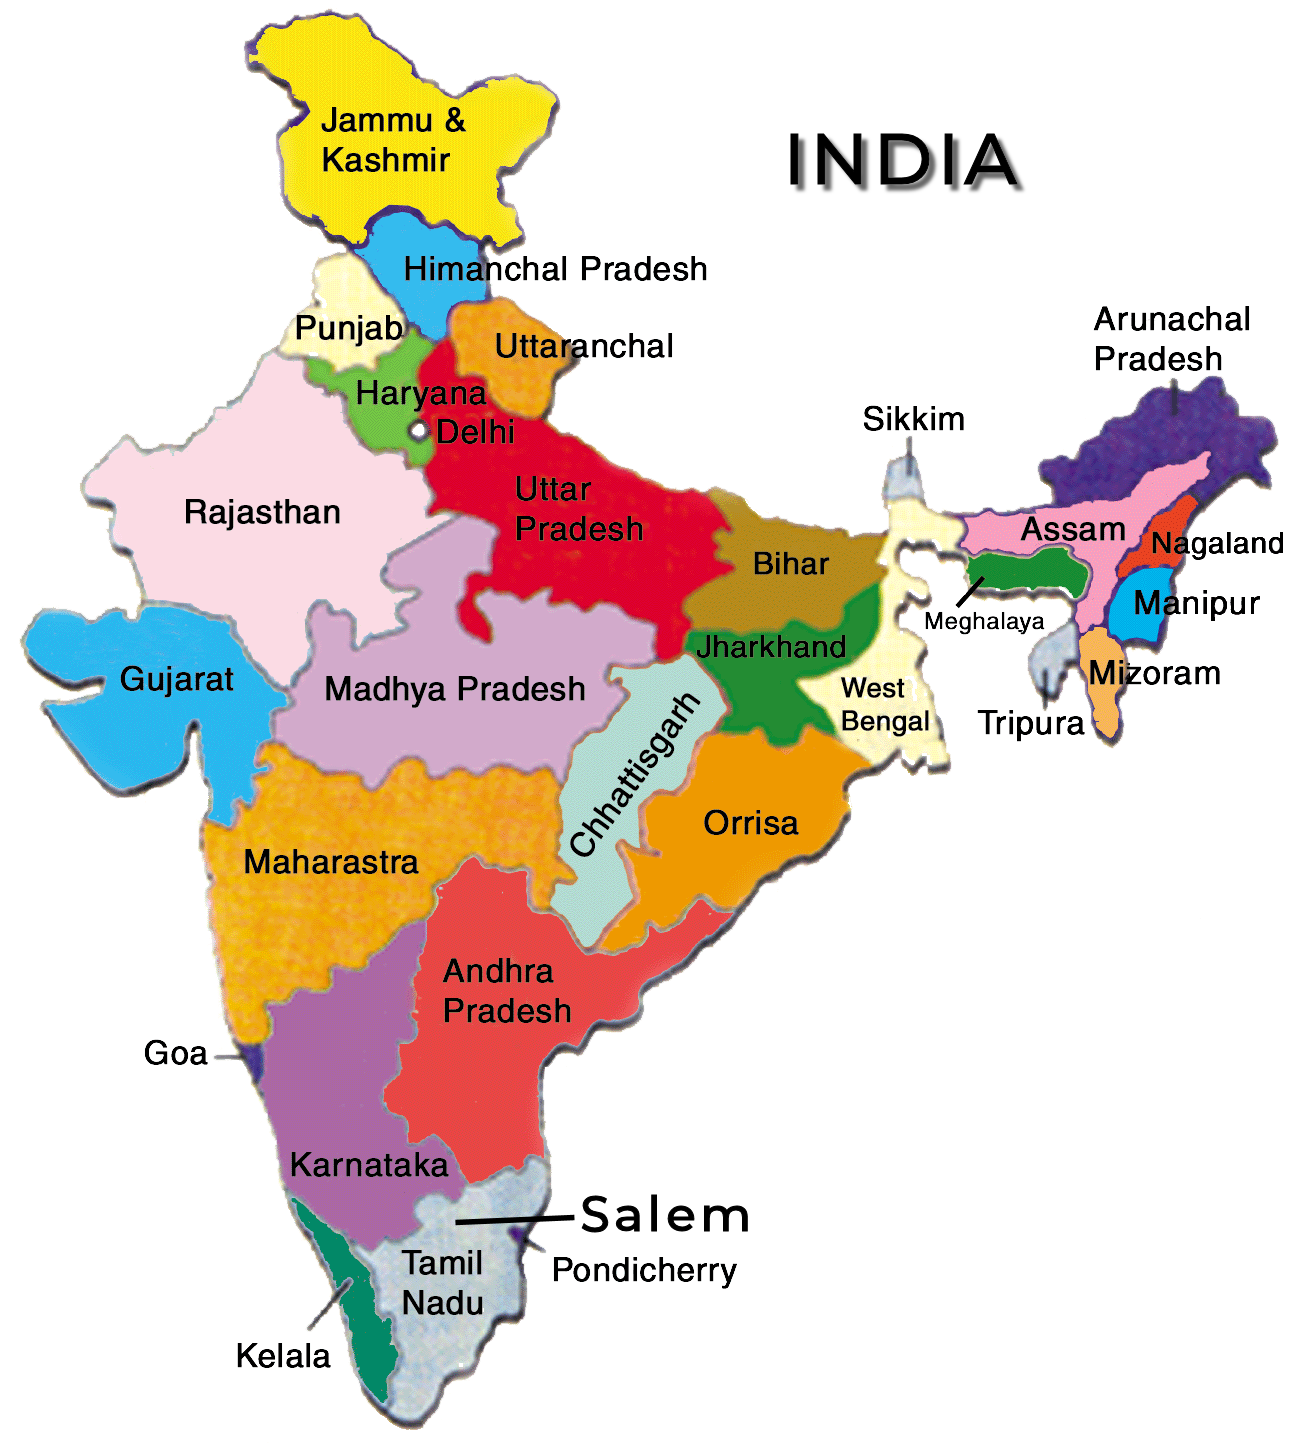 Map of India